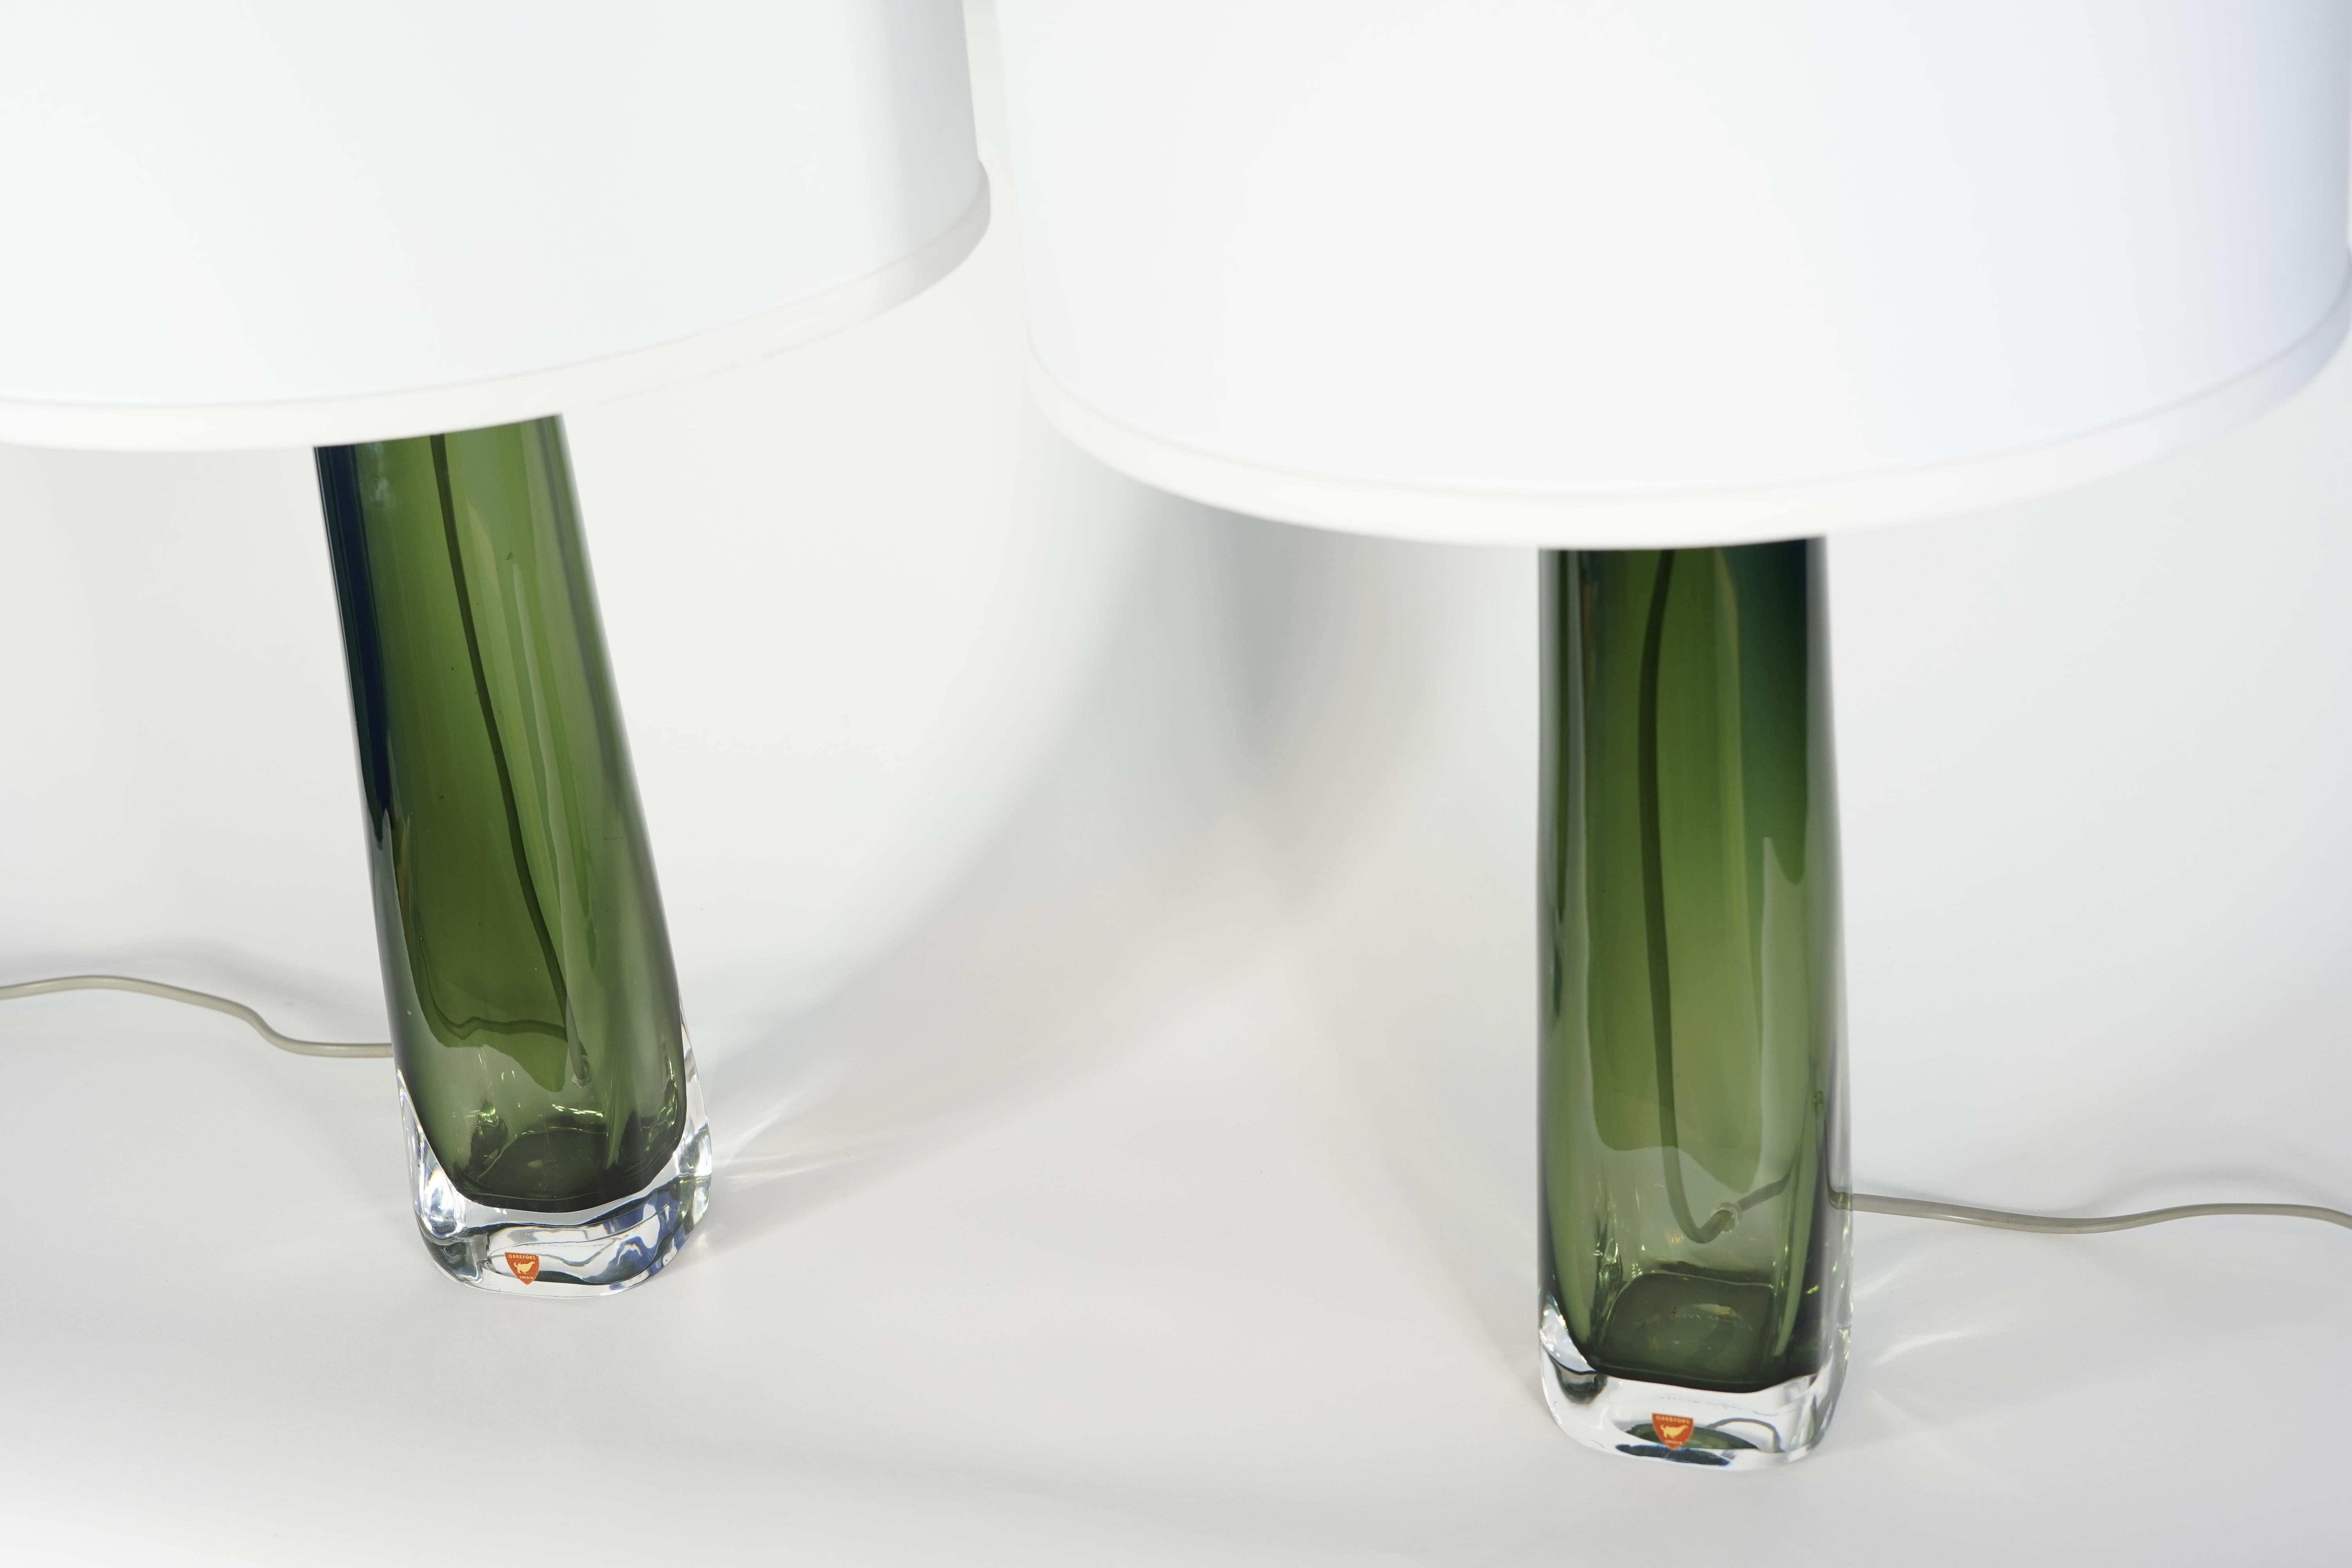 Tall pair of Green Orrefors glass lamps with chrome fittings, signed Carl Fagerlund Orrefors on the bottom
The glass body is 13